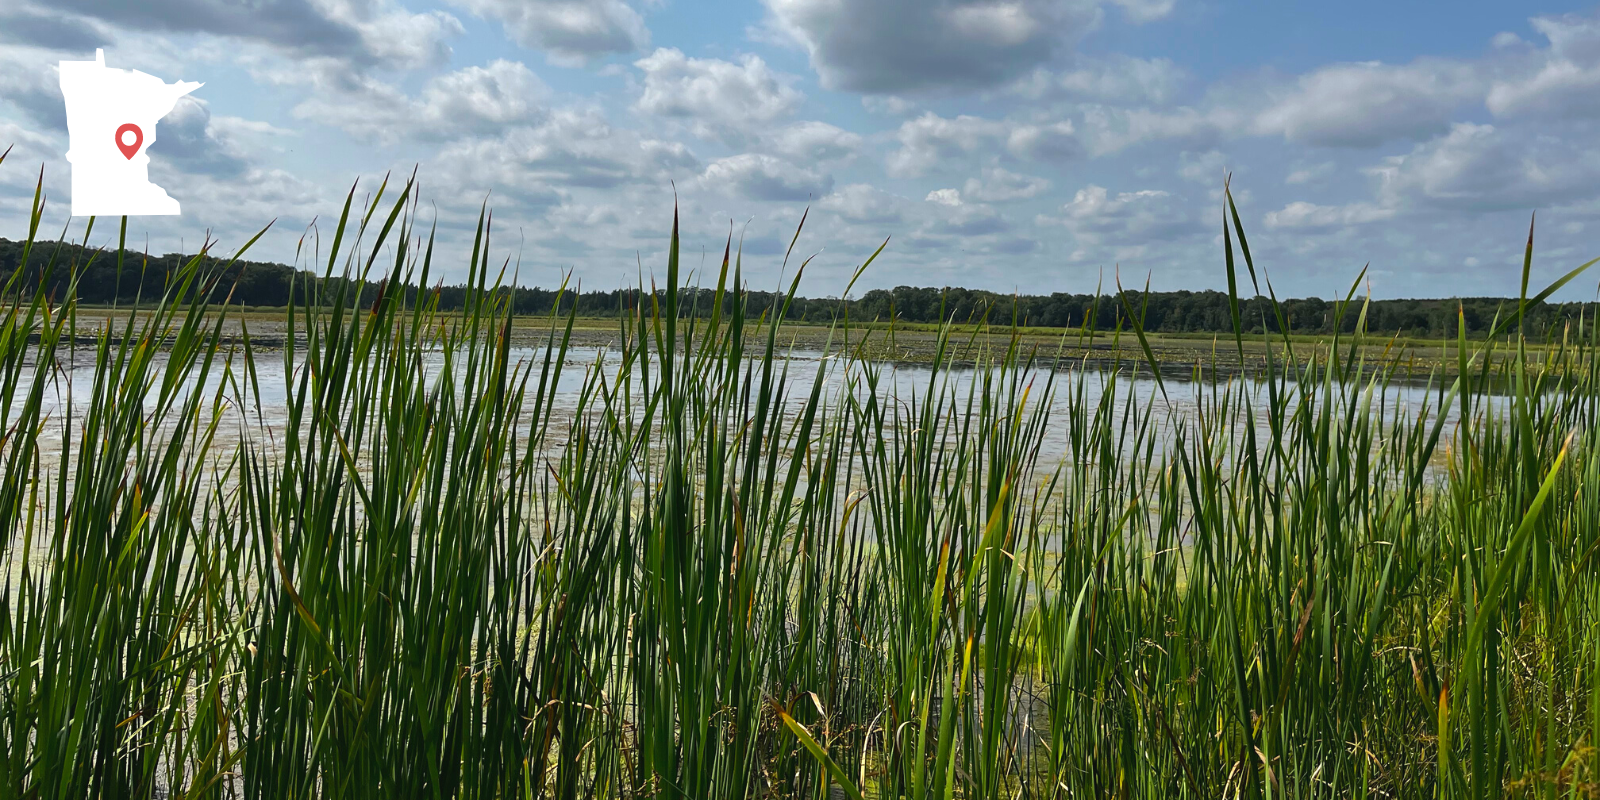 Green cattails and marsh grasses rise up in the foreground, with lake in the middle distance, a tree line in the background and blue sky with white clouds overhead.